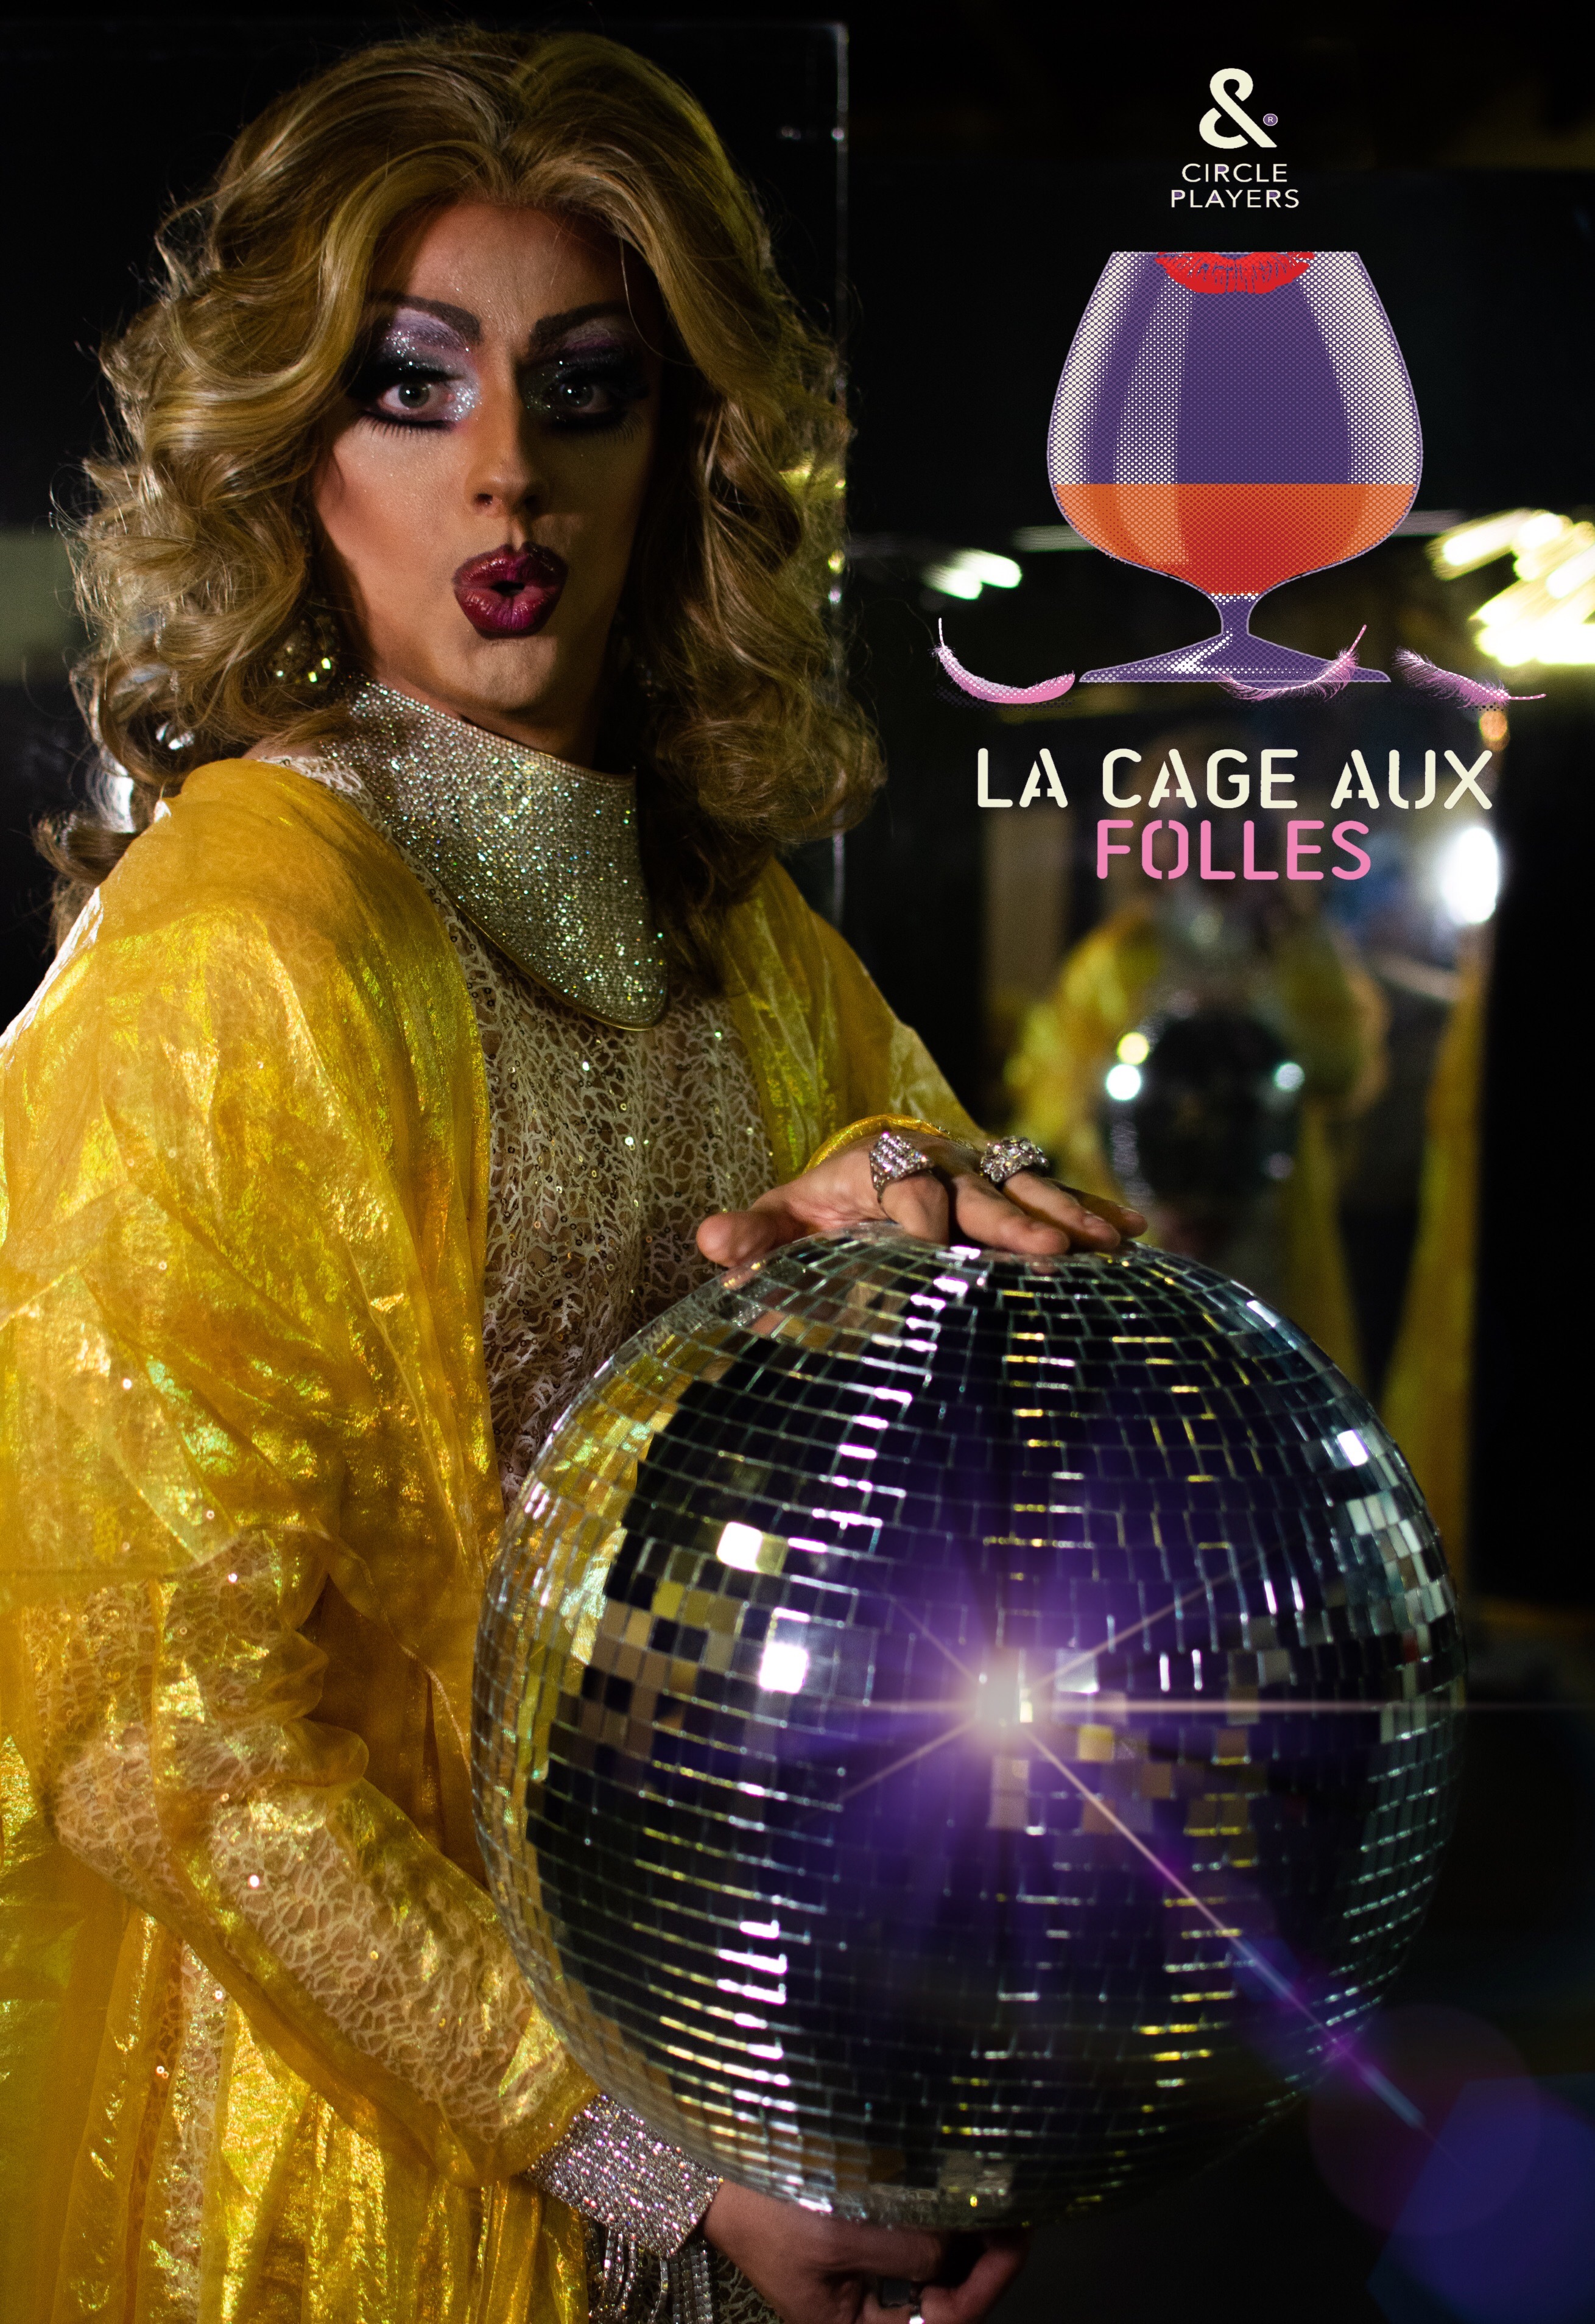 Michael Baird stars as Albin/ZaZa In Circle Players production of La Cage Aux Folles playing at the Looby Theatre Jan 17-Feb 2. Info at www.circleplayers.net 